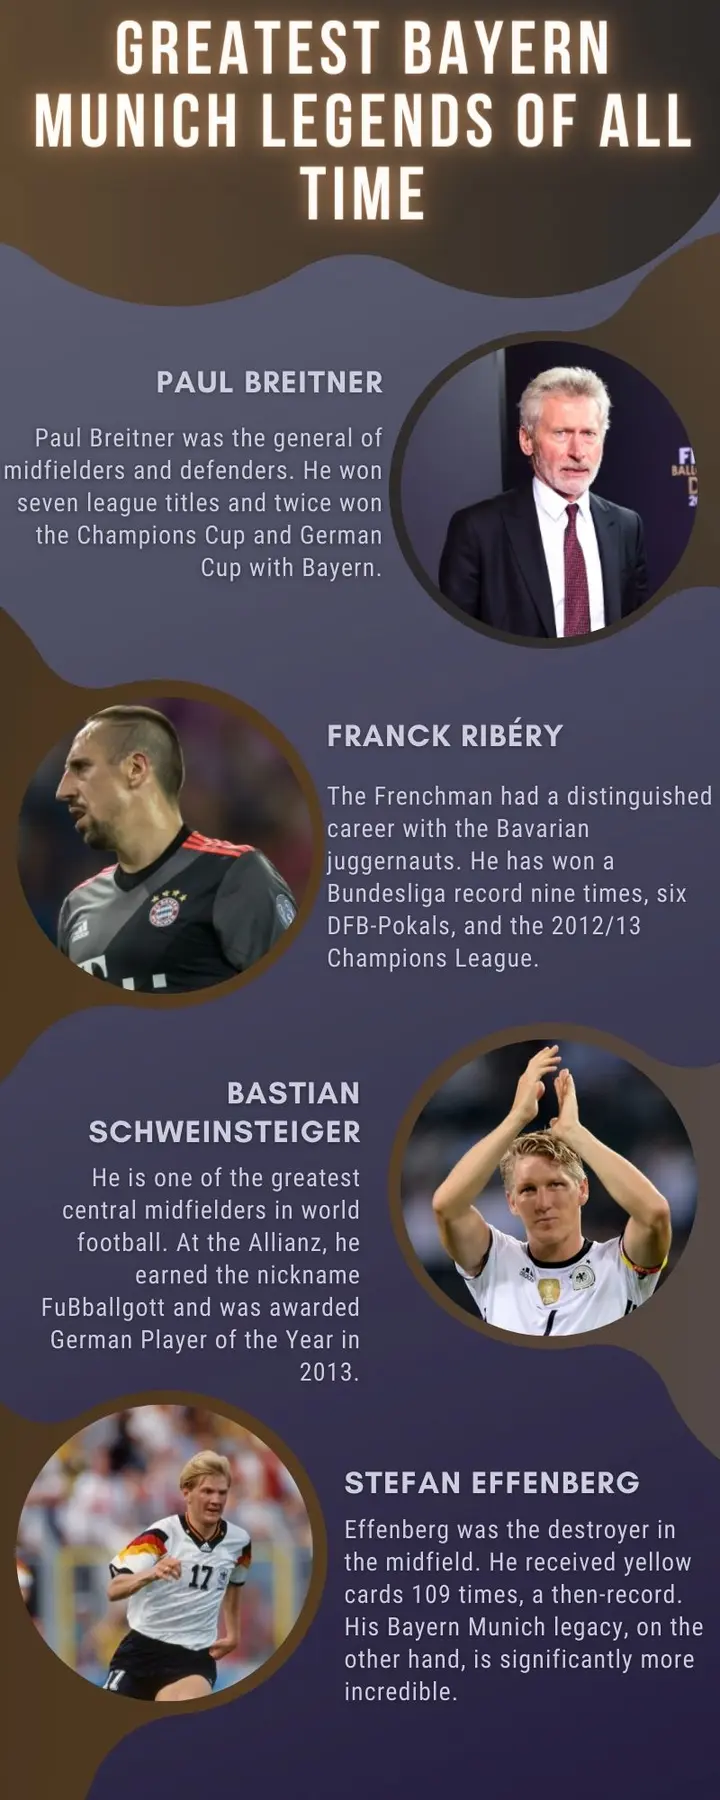 Bayern Munich legends of all time ranked